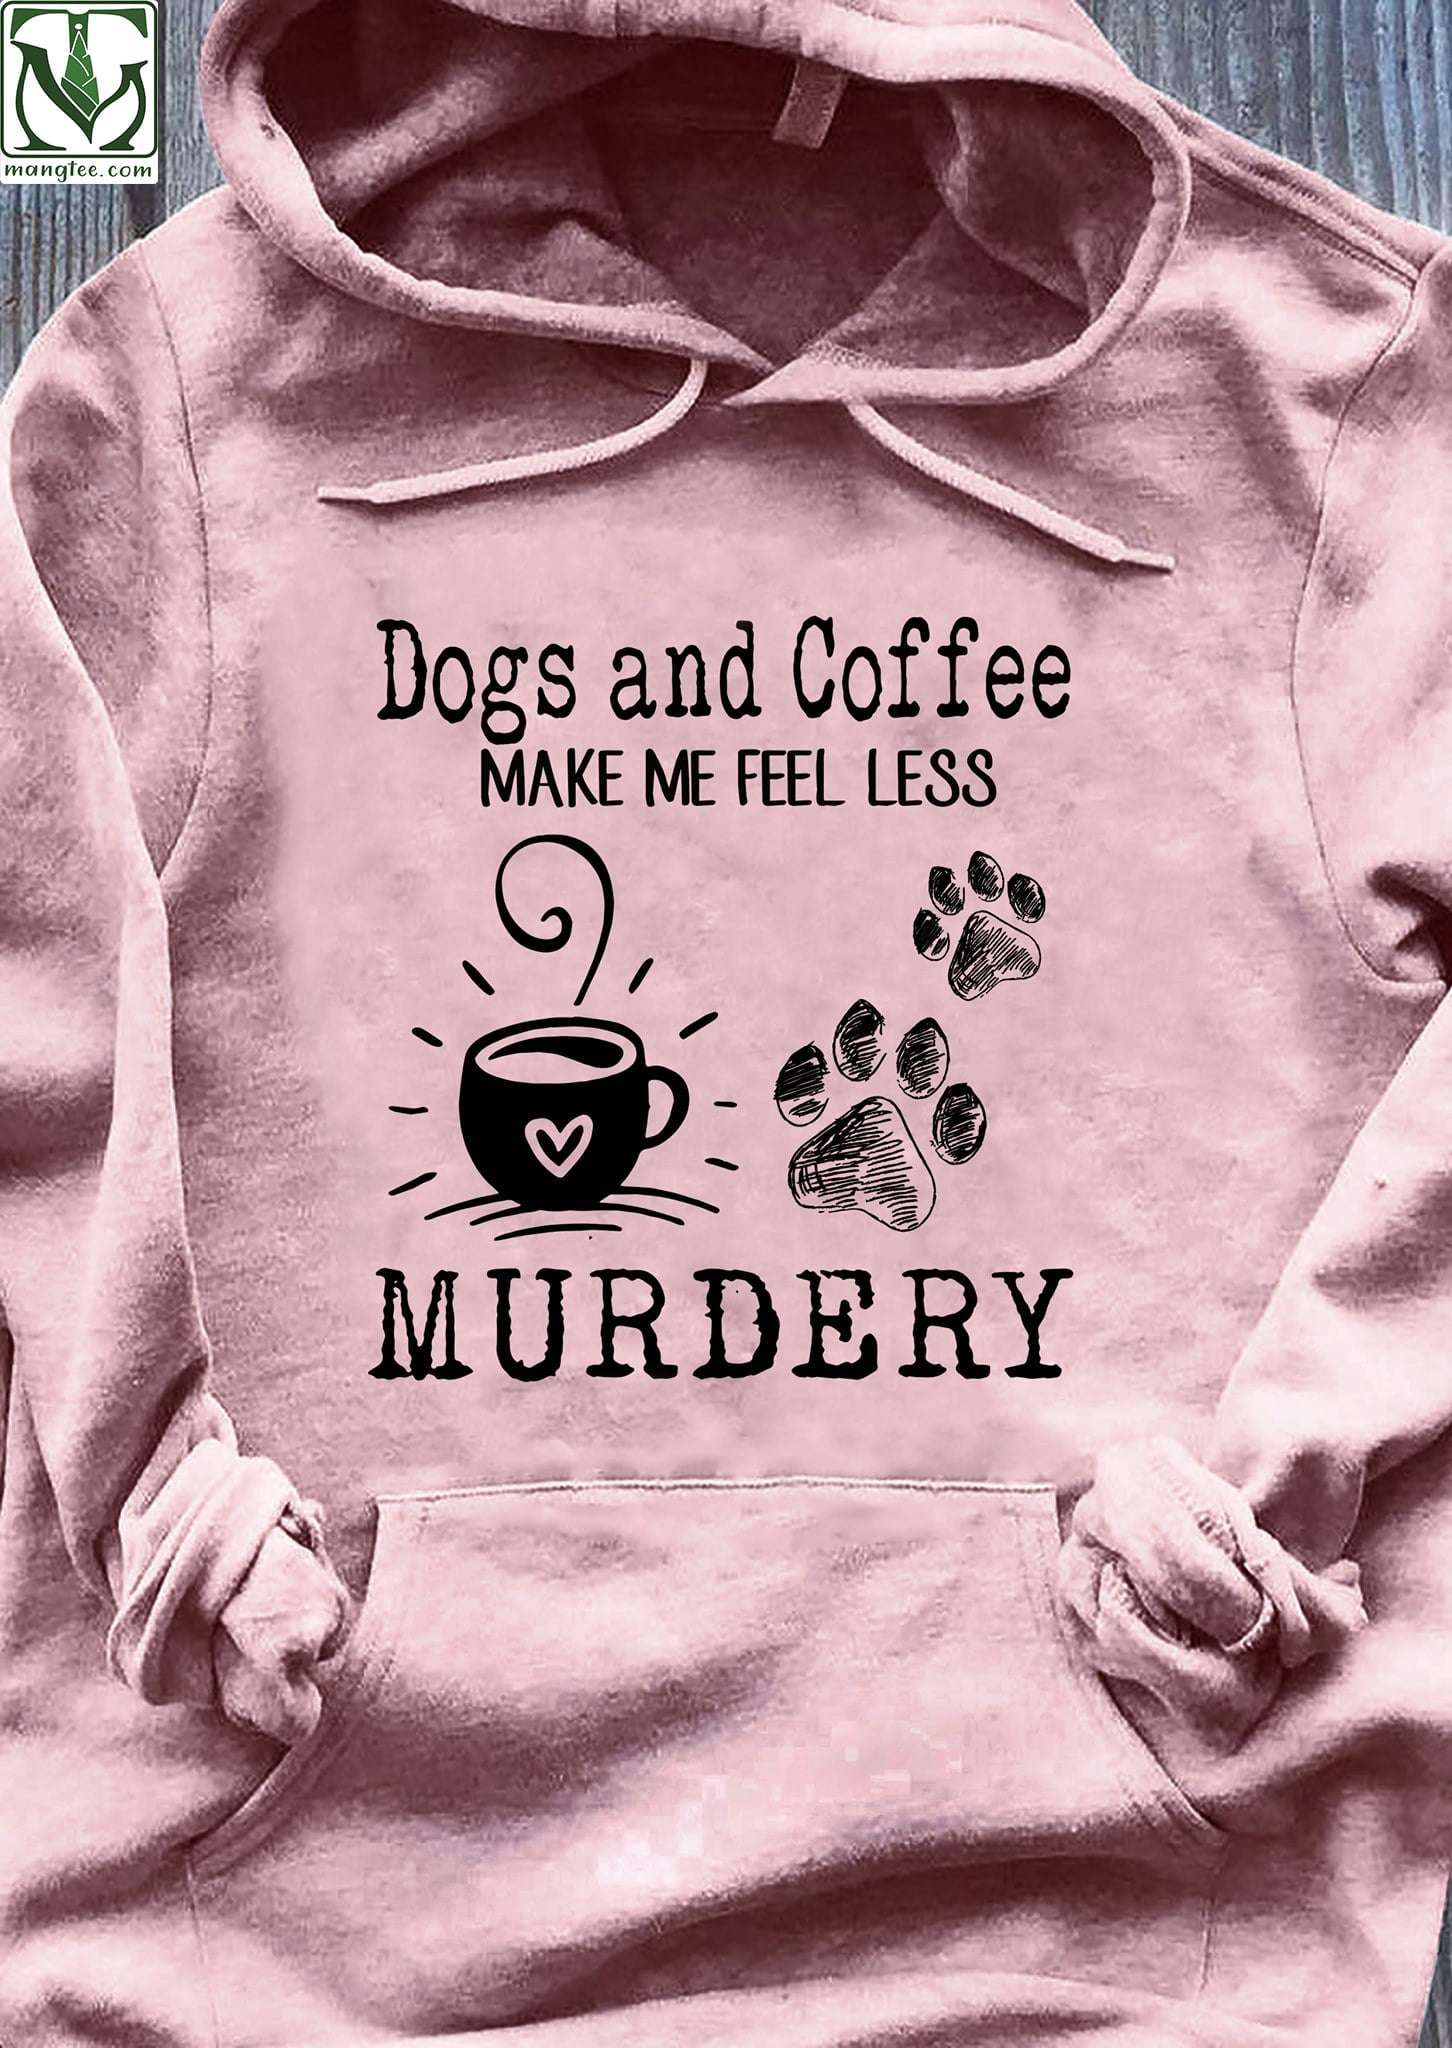 Dogs and coffee make me fell less murdery - Coffee and dog footprint